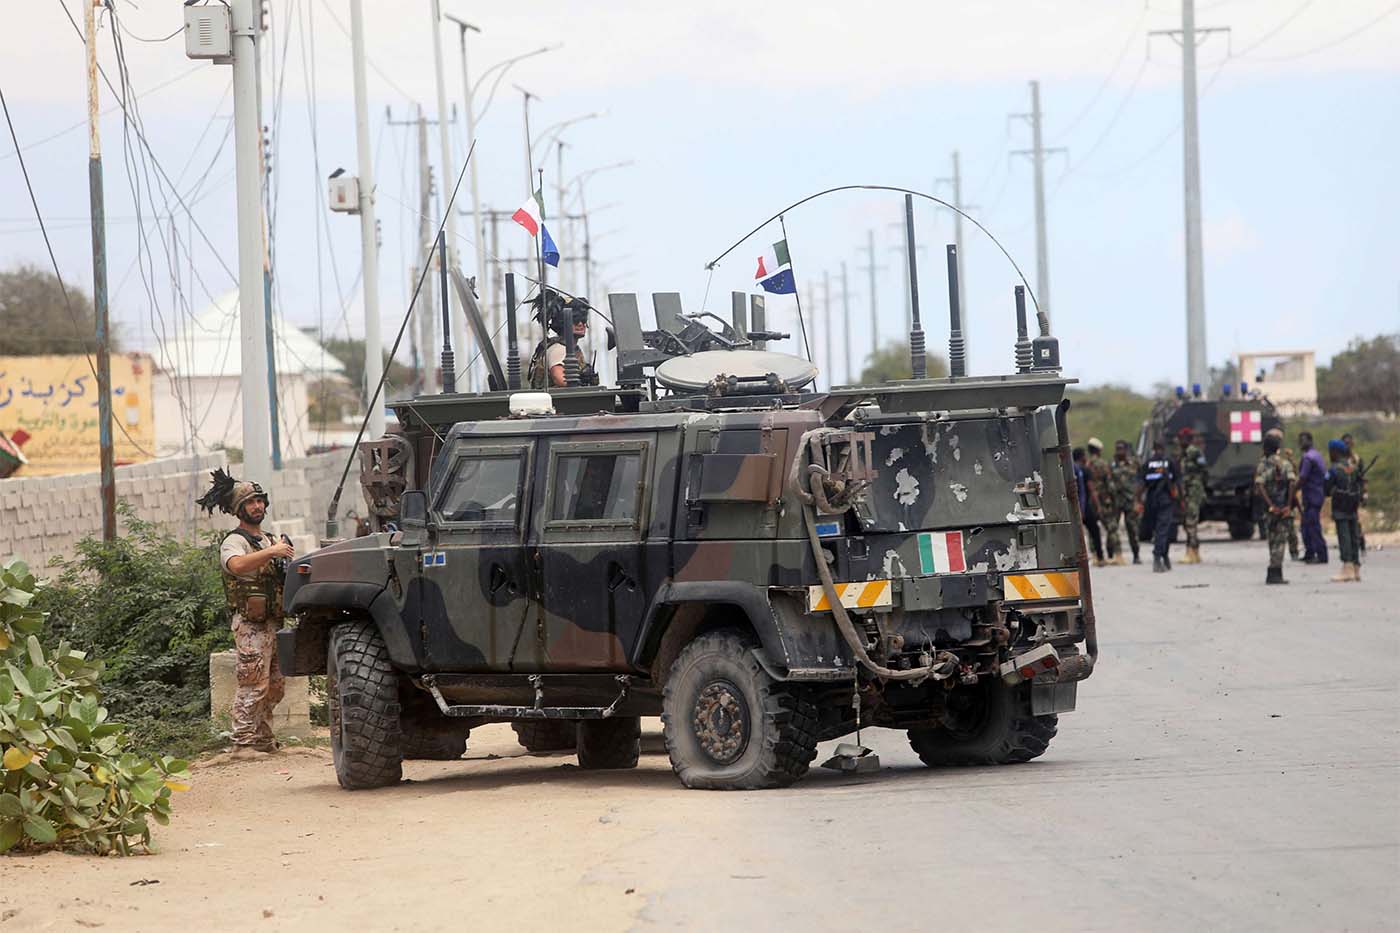 Italian security forces are seen near armoured vehicles at the scene of an attack on an Italian military convoy in Mogadishu